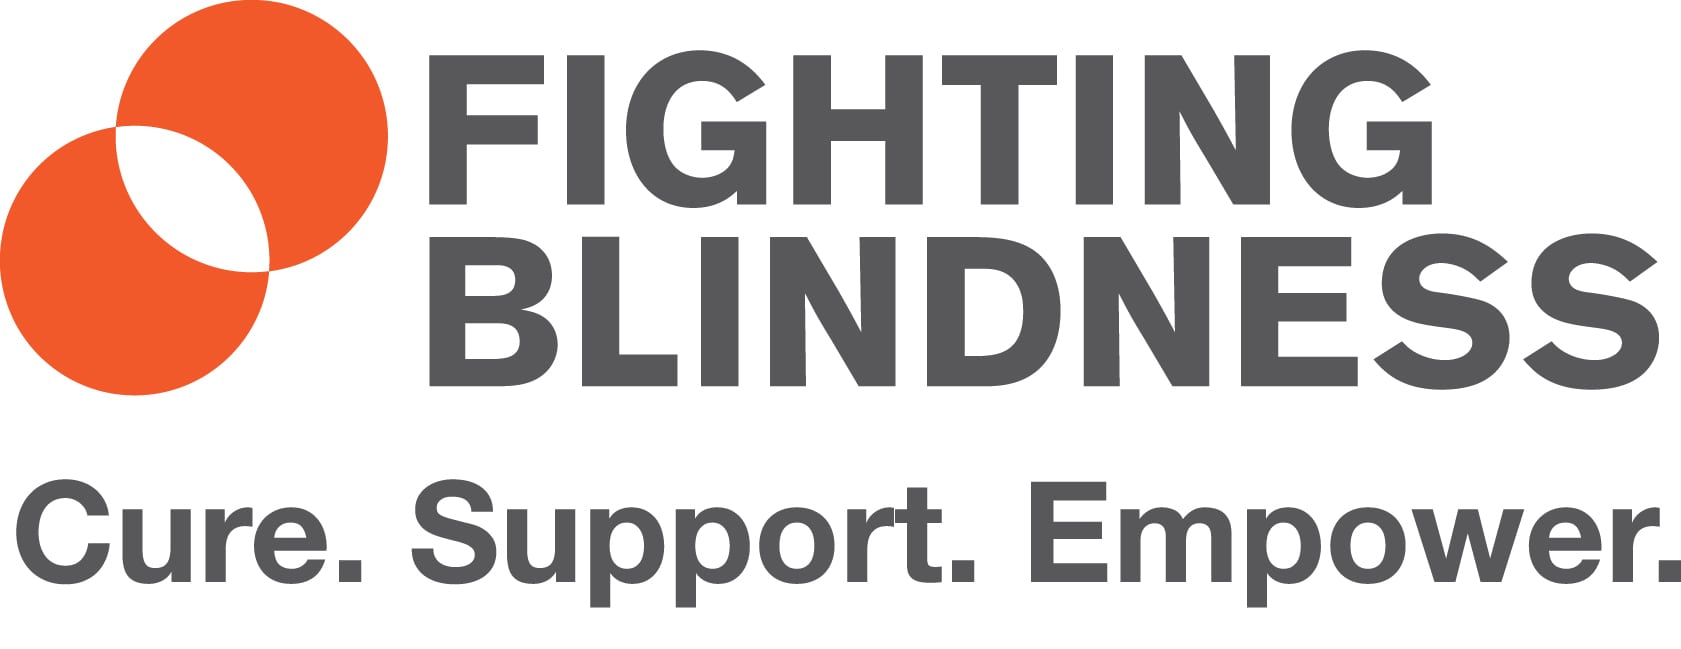 Fighting Blindness - Malehealth.ie